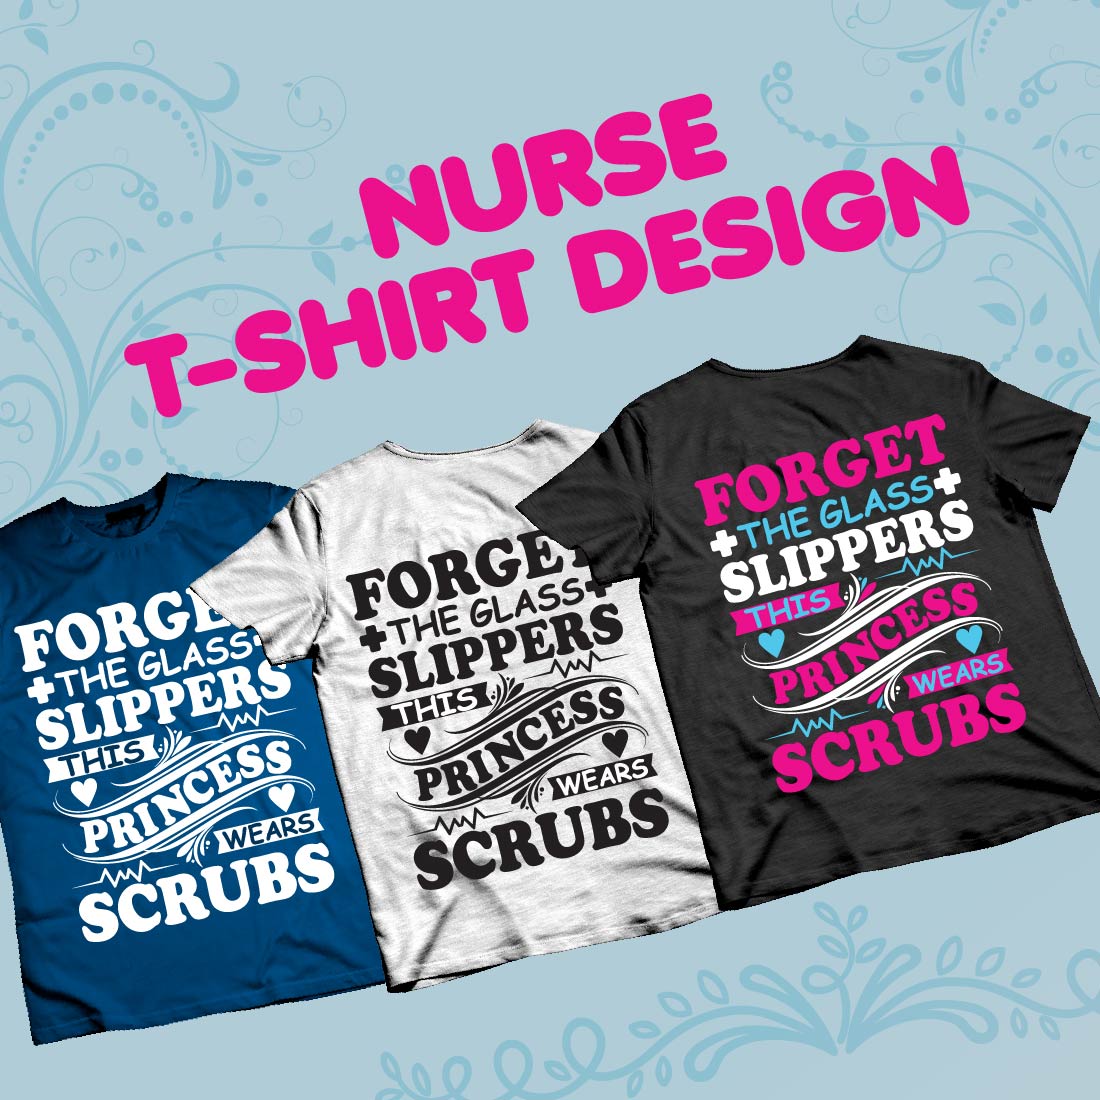 A selection of images of t-shirts with a great print about nurses.